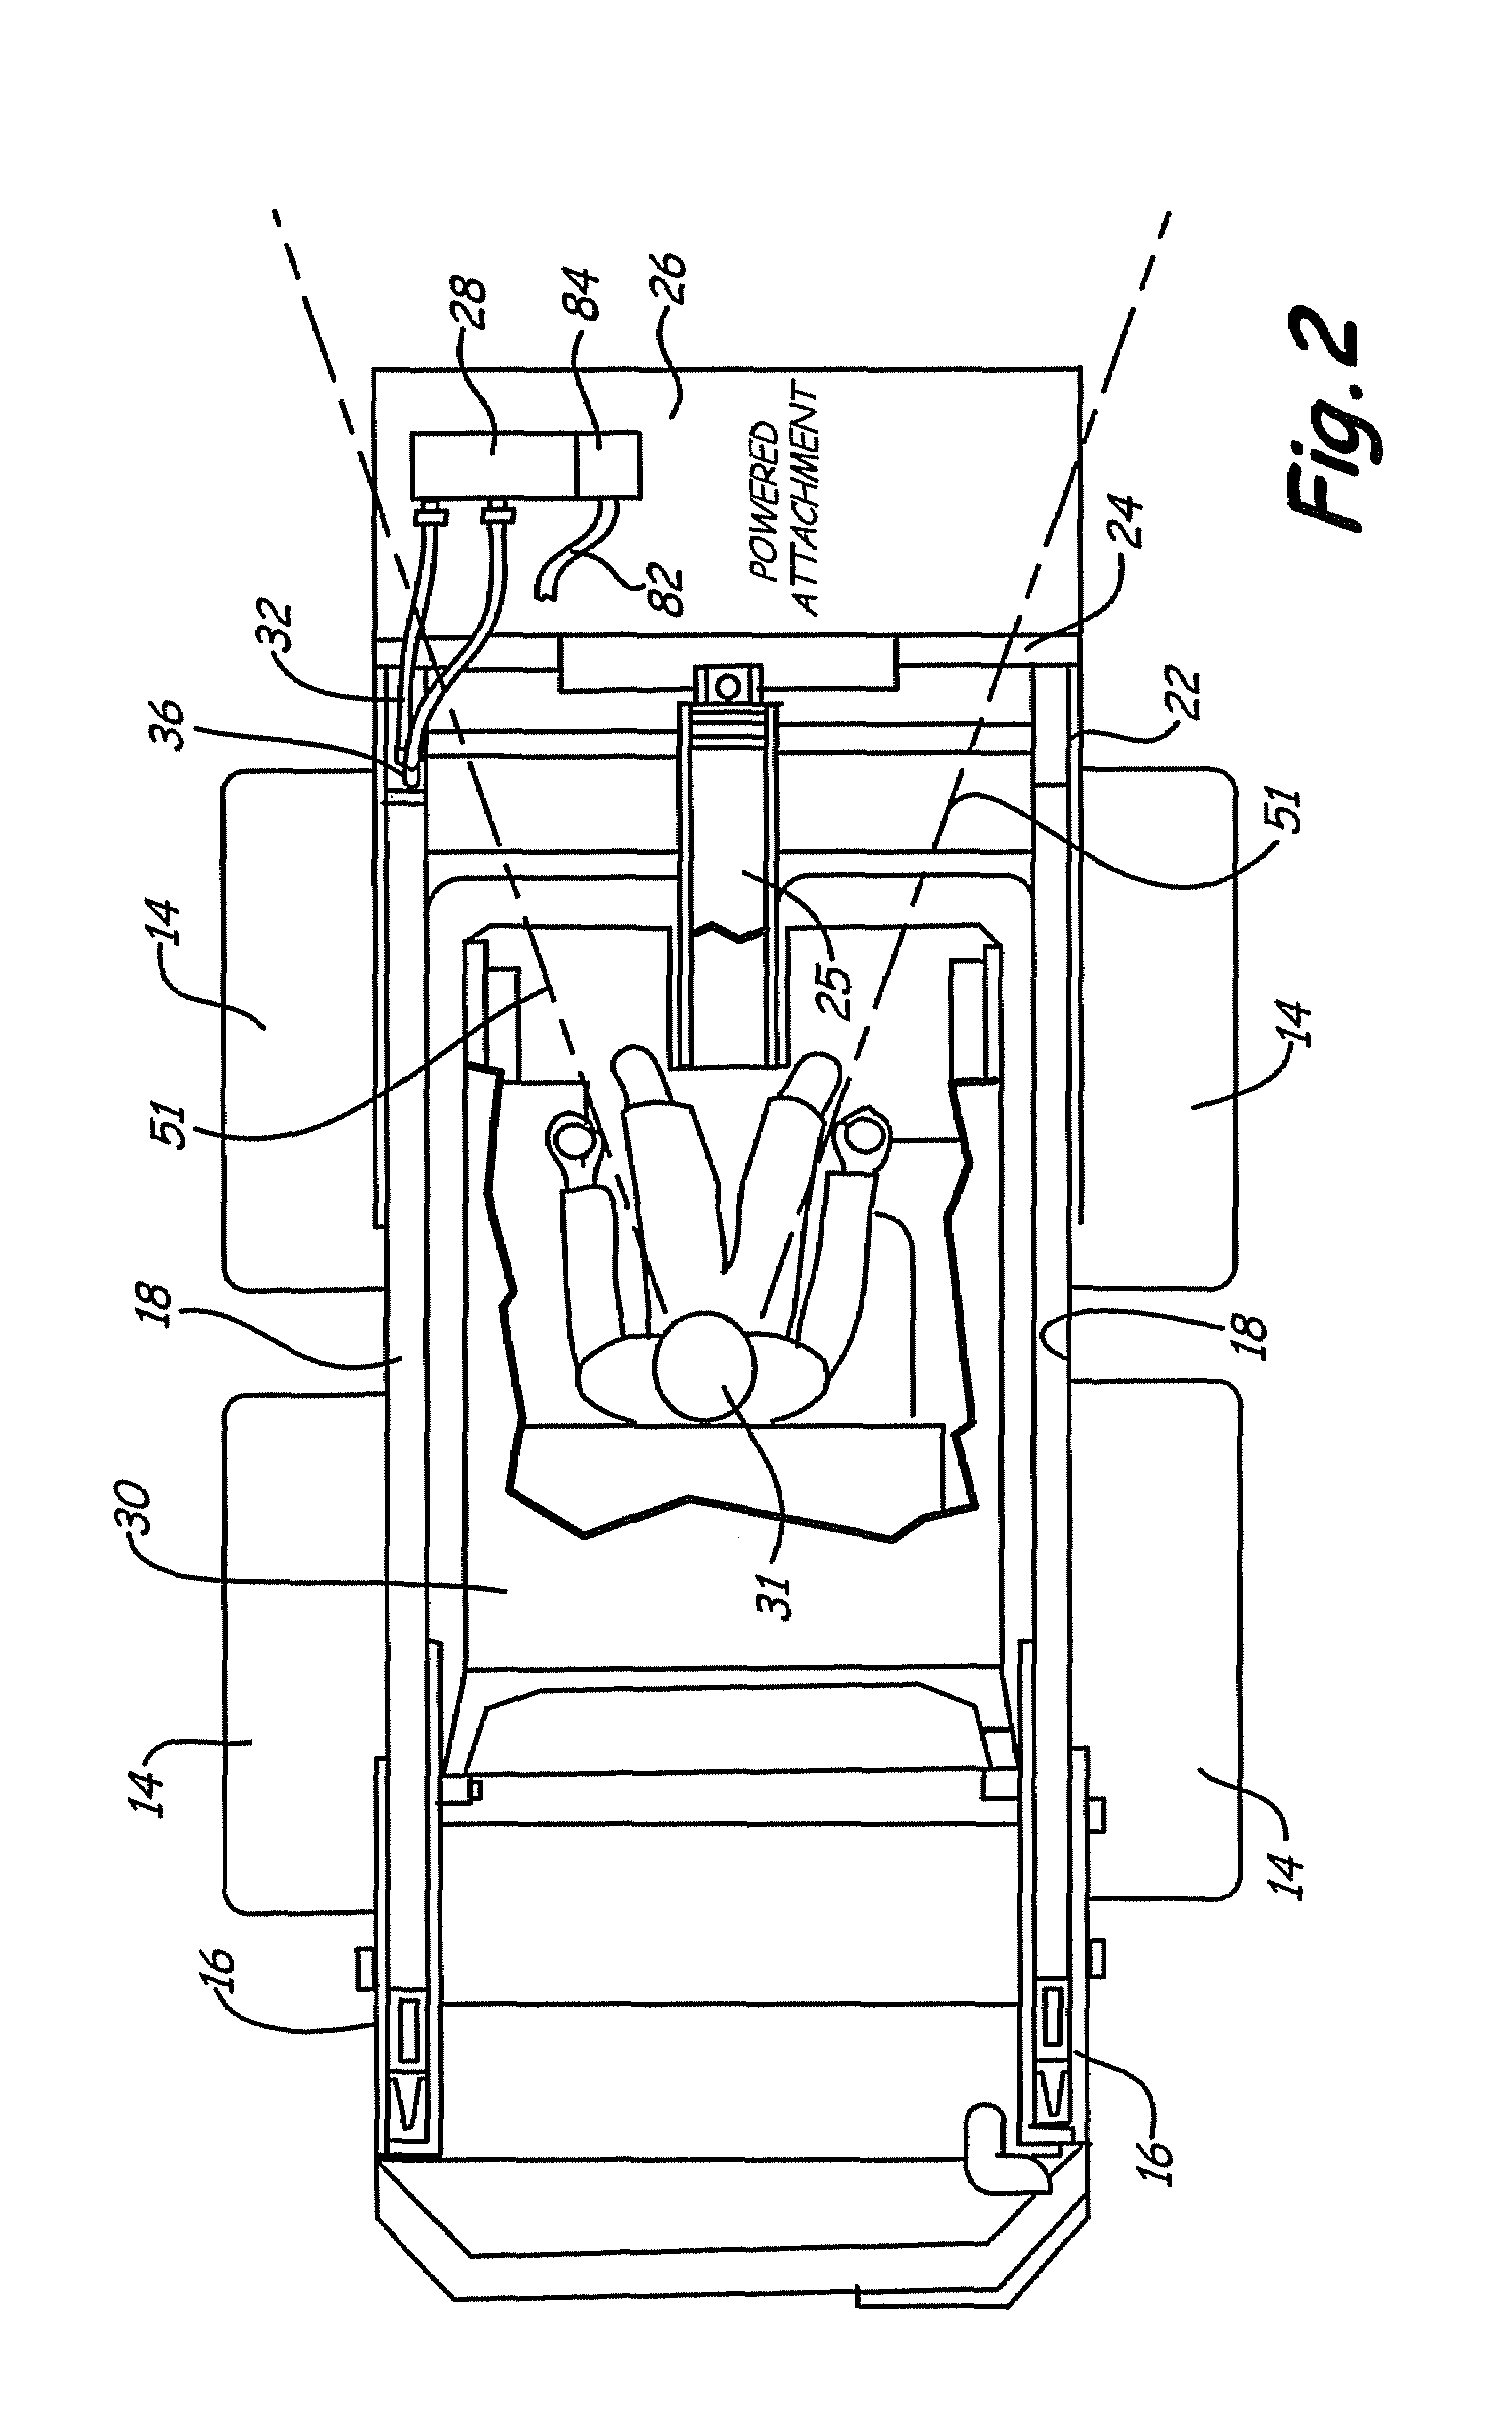 Integral power or electrical conduit coupler